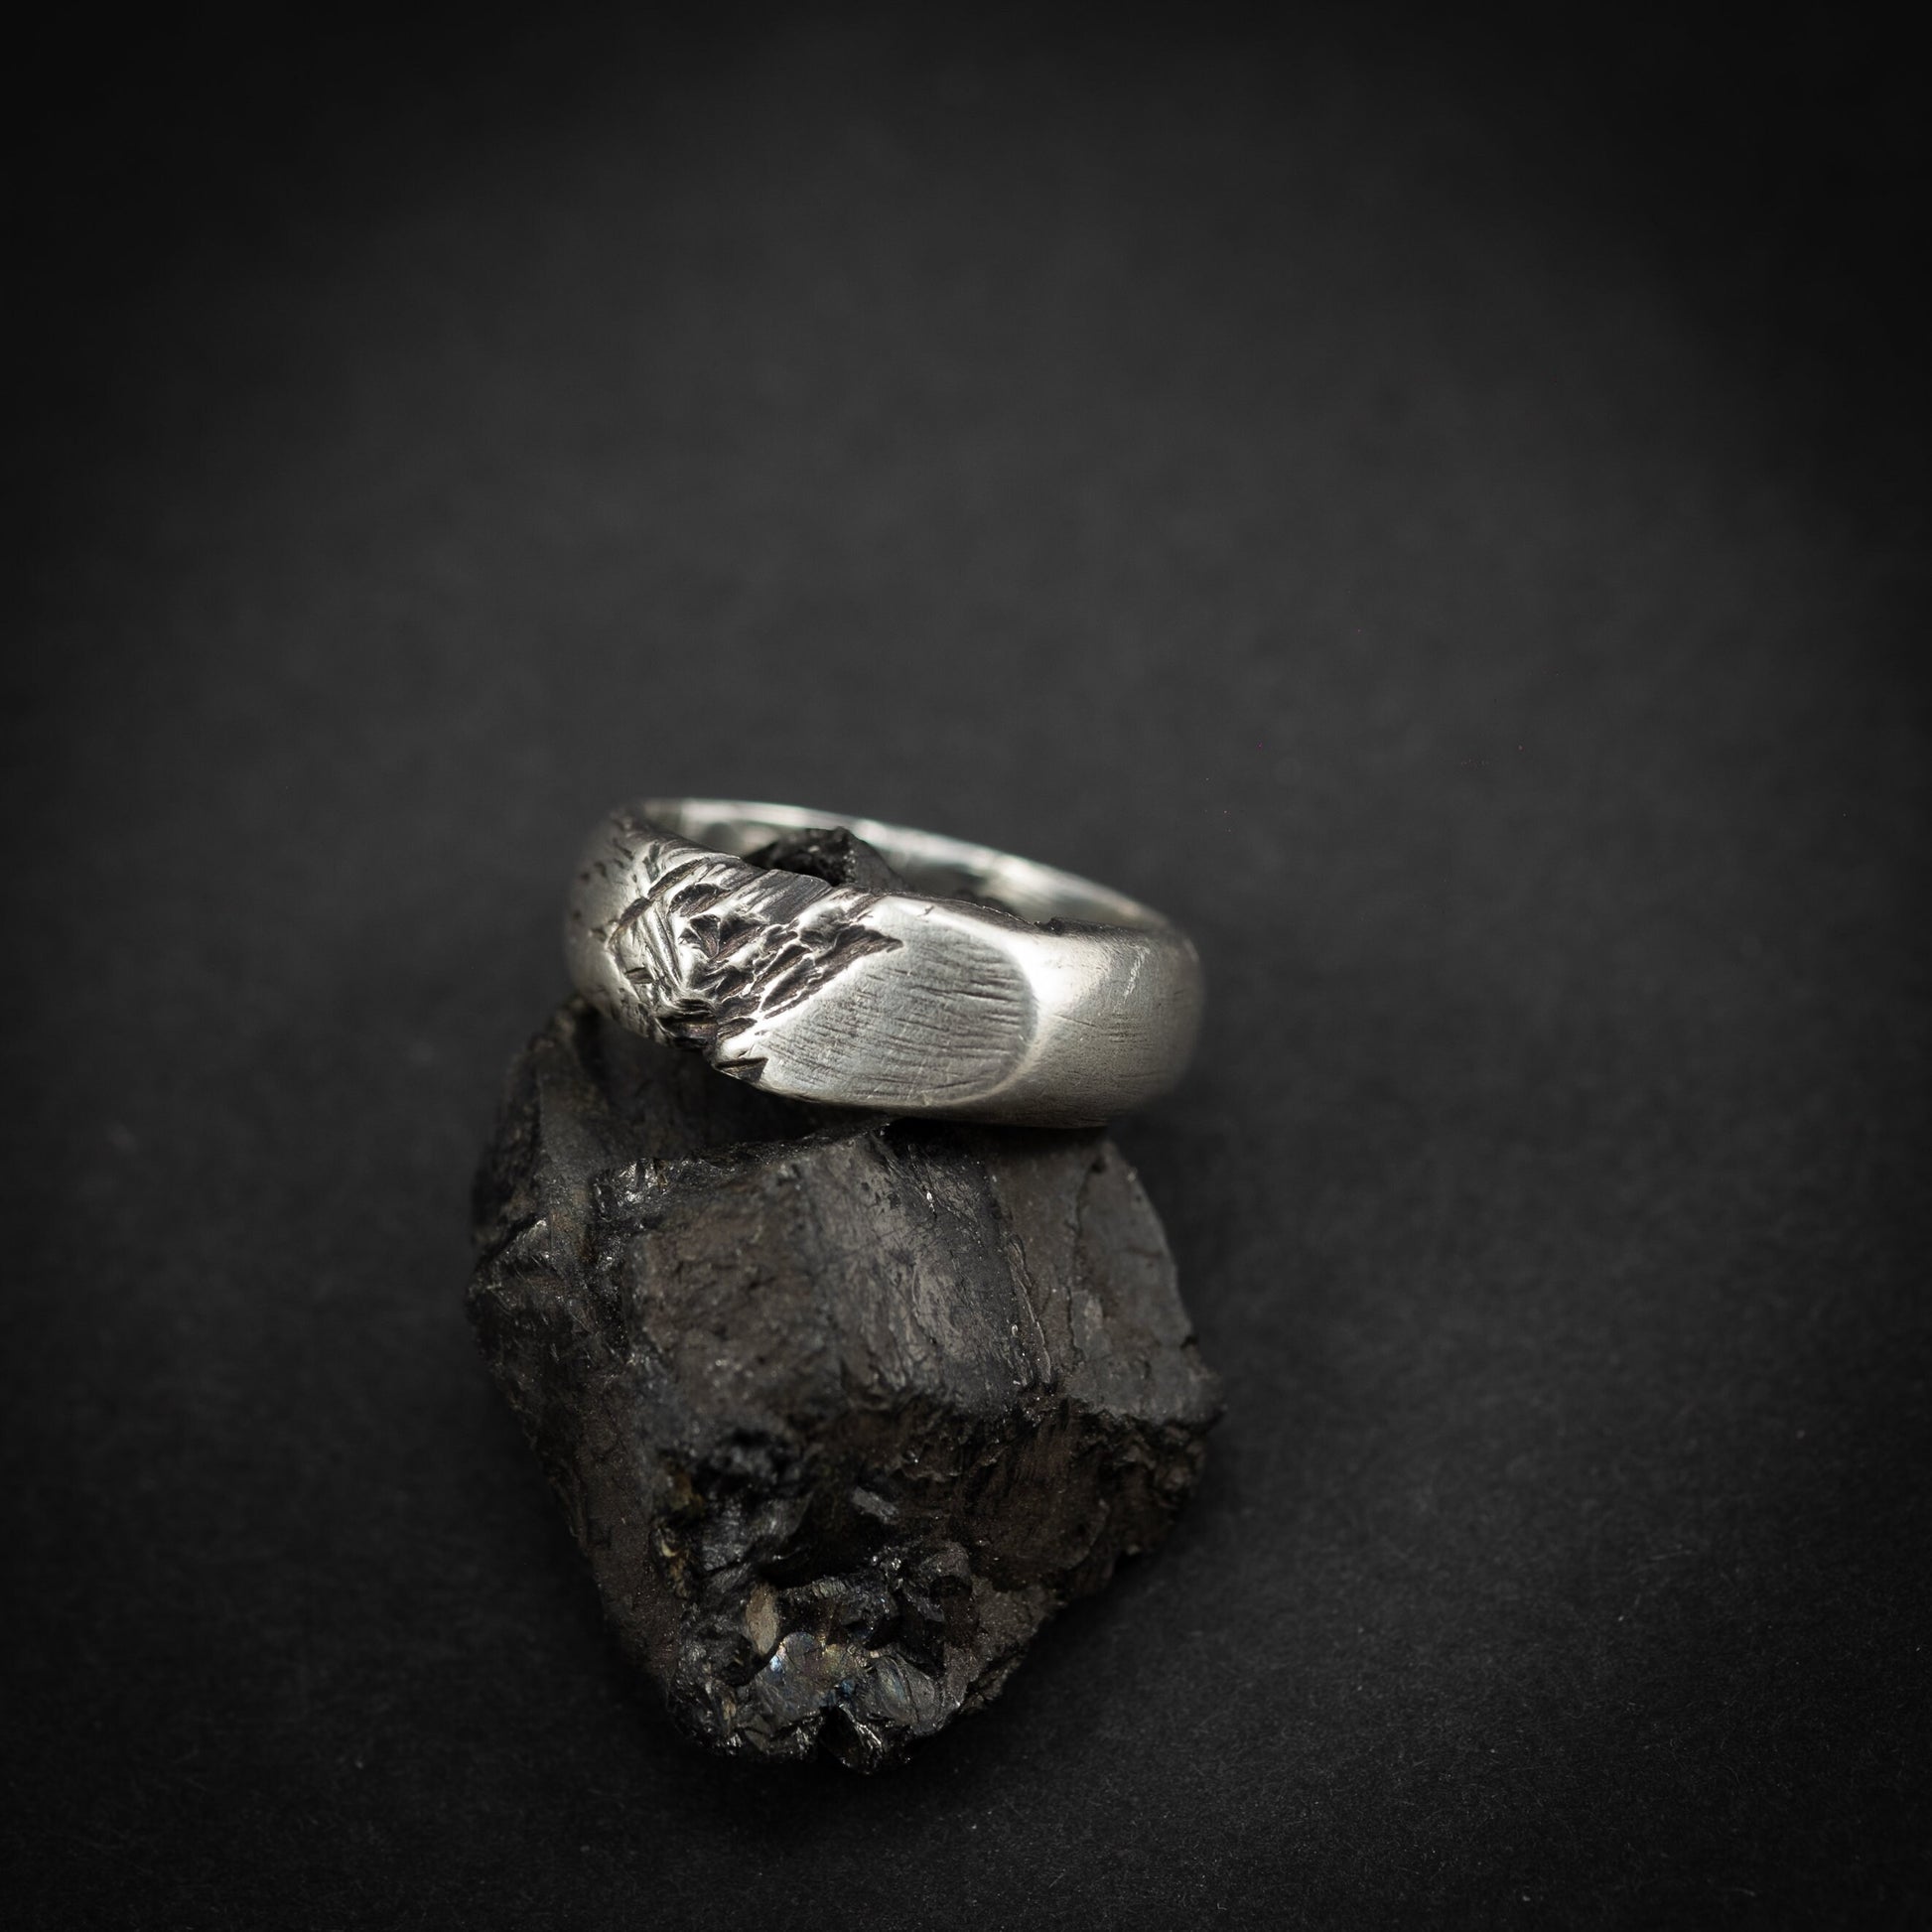 Rustic silver mens signet ring, brutalist raw oxidized ring, Handmade jewelry, Unique gift for men, husband anniversary gift